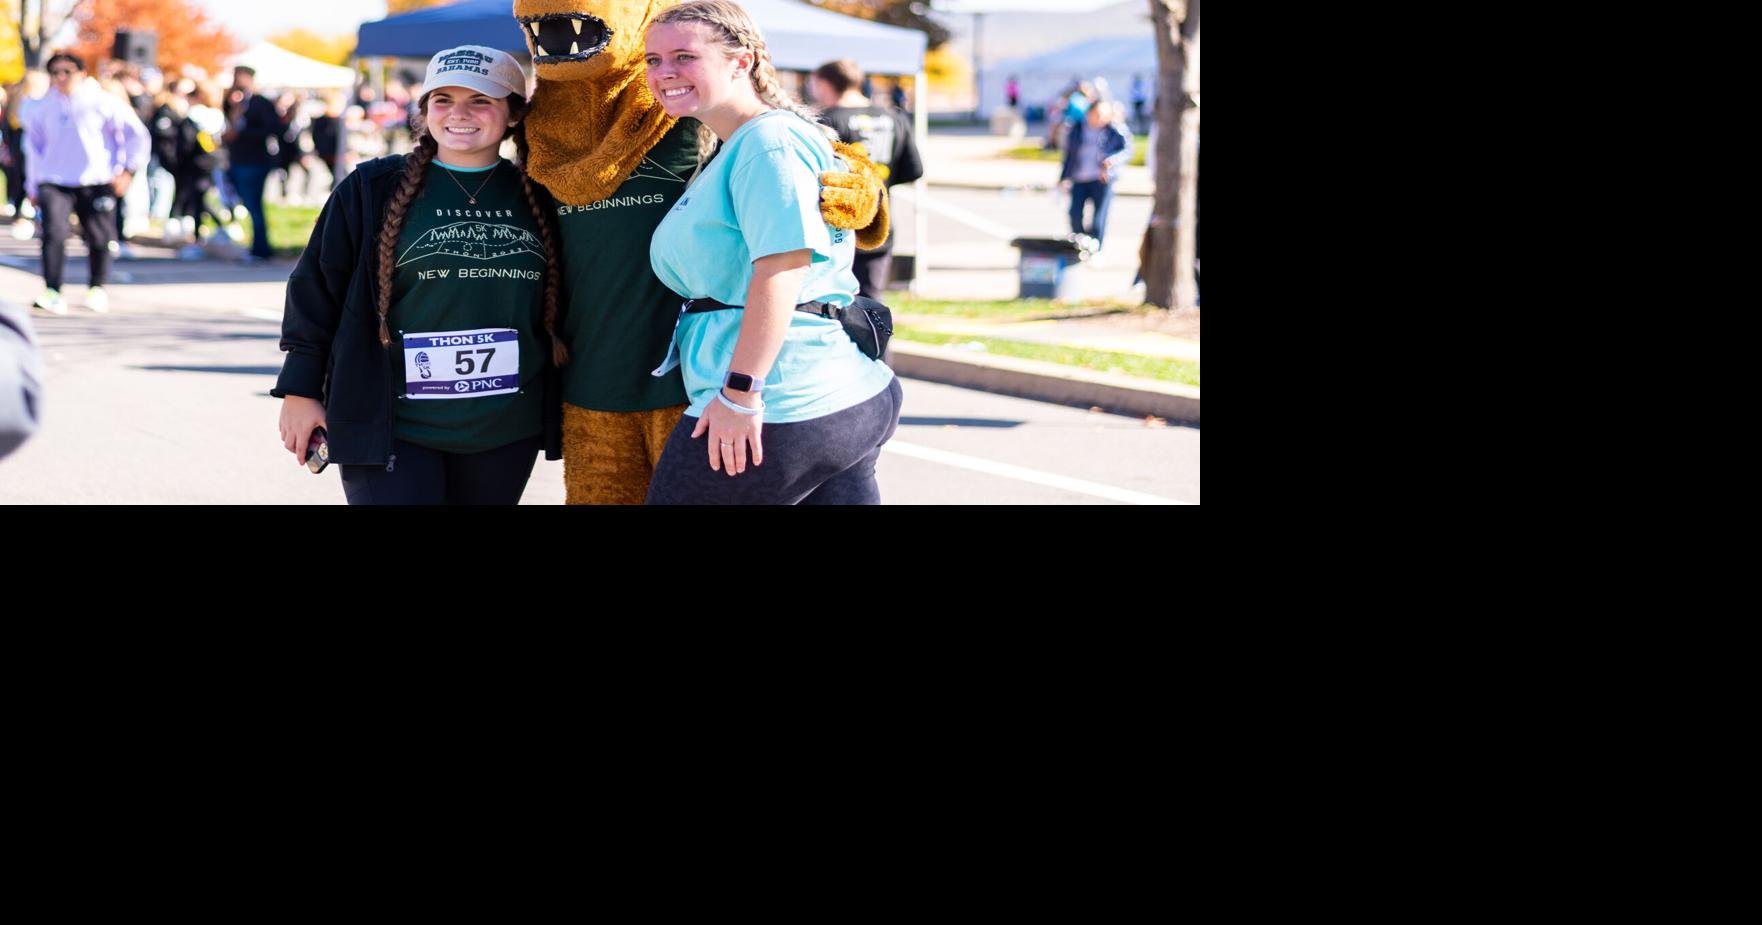 Thon 5K After race with lion Penn State, State College News